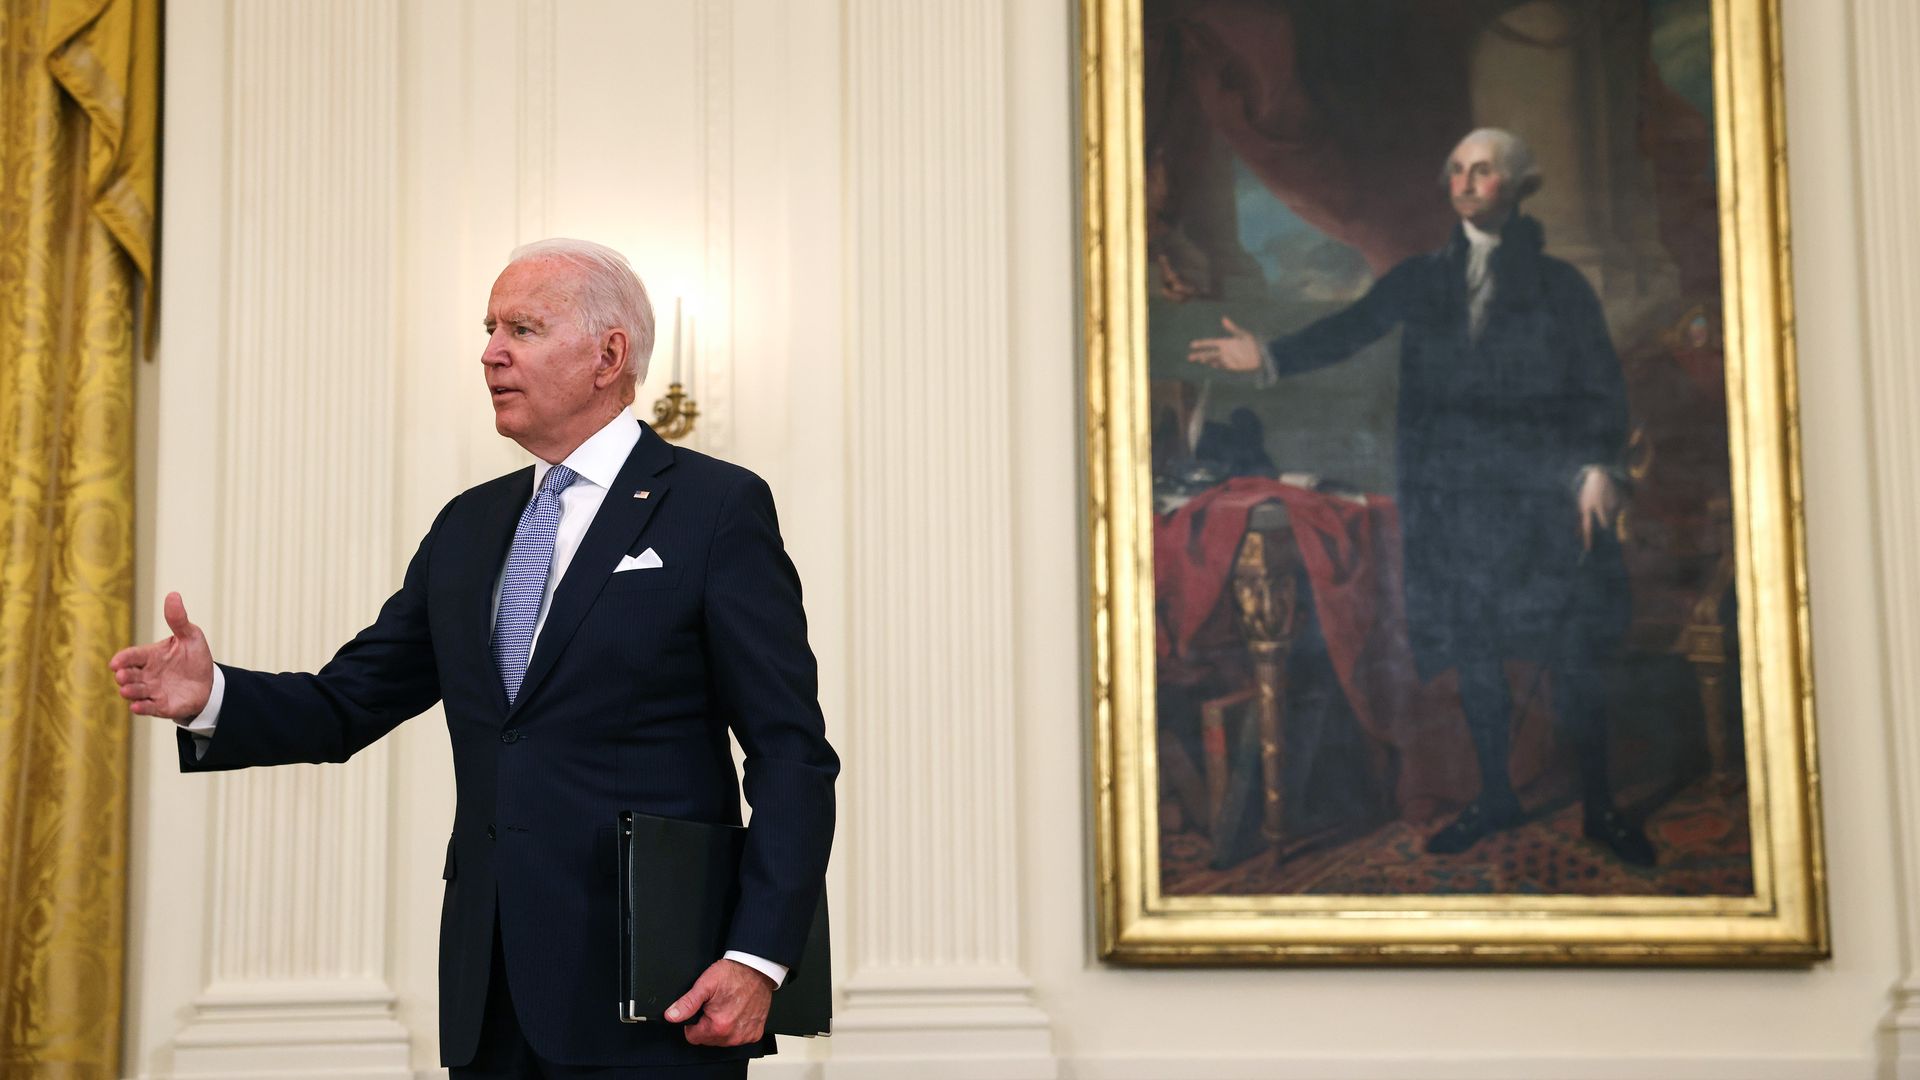 President Biden is seen gesturing in front of a portrait of George Washington in a similar pose.